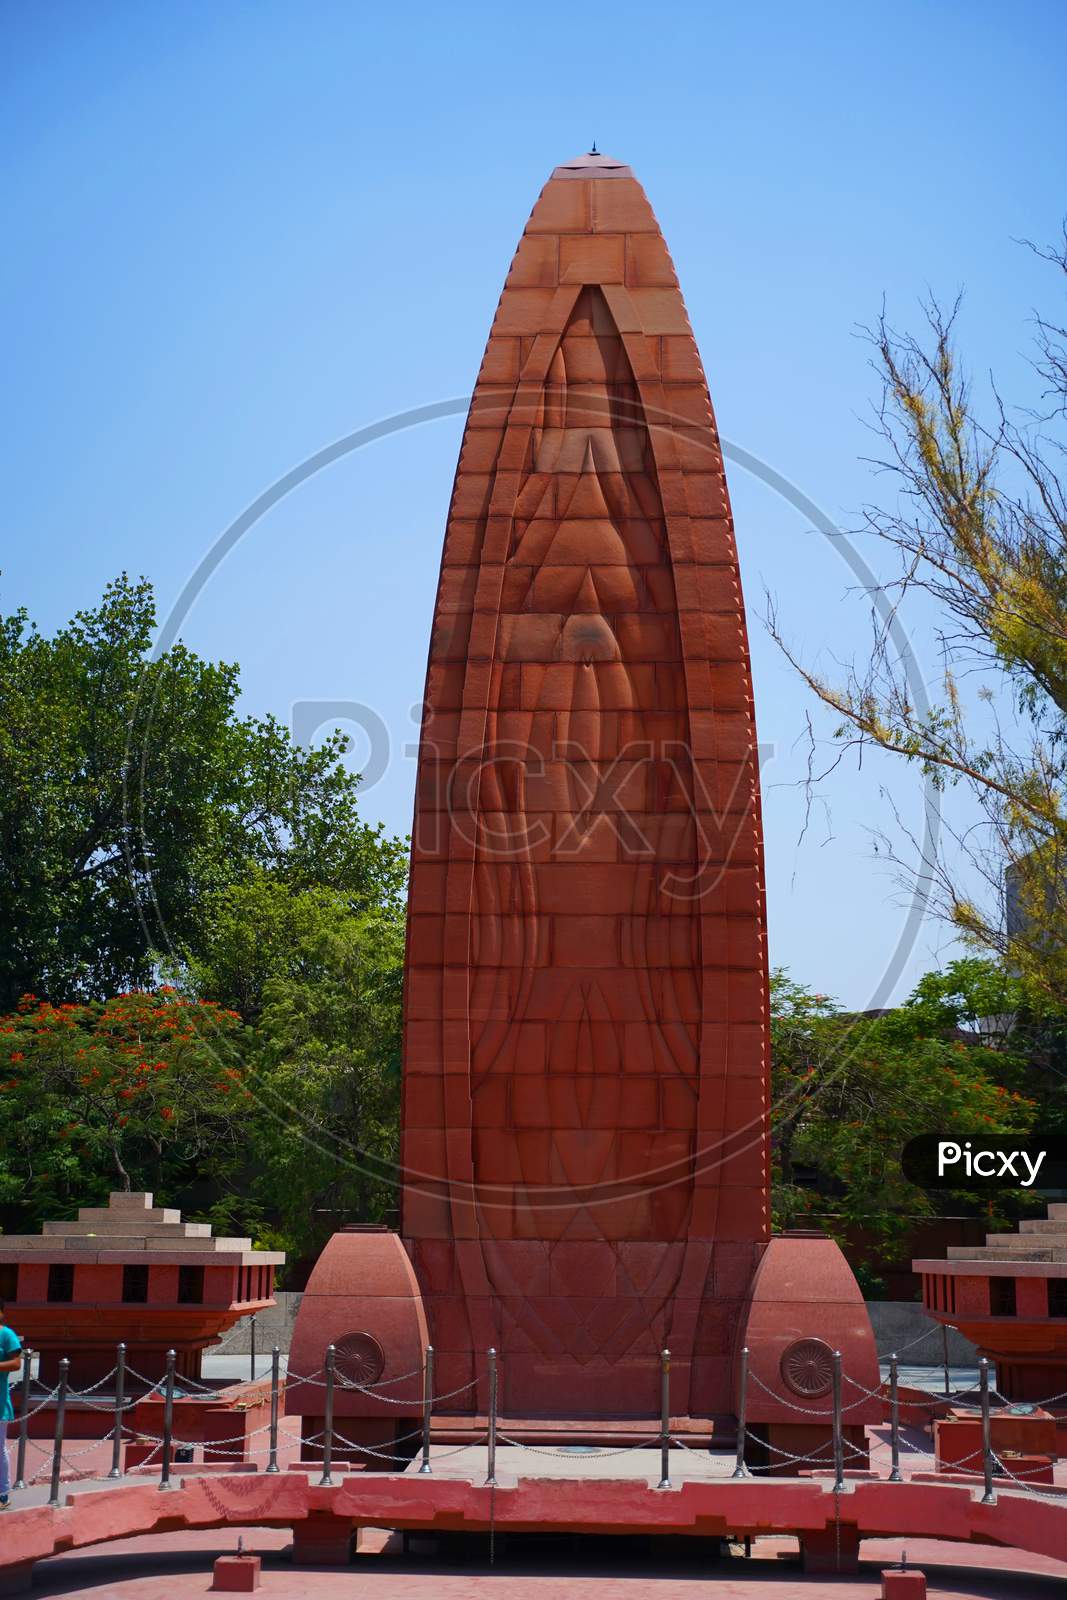 Jallianwala Bagh is a historic garden and ‘memorial of national importance’ in Amritsar, India, preserved in the memory of those wounded and killed in the Jallianwala Bagh Massacre that occurred on the site on the festival of Vaisakhi, 13 April 1919.